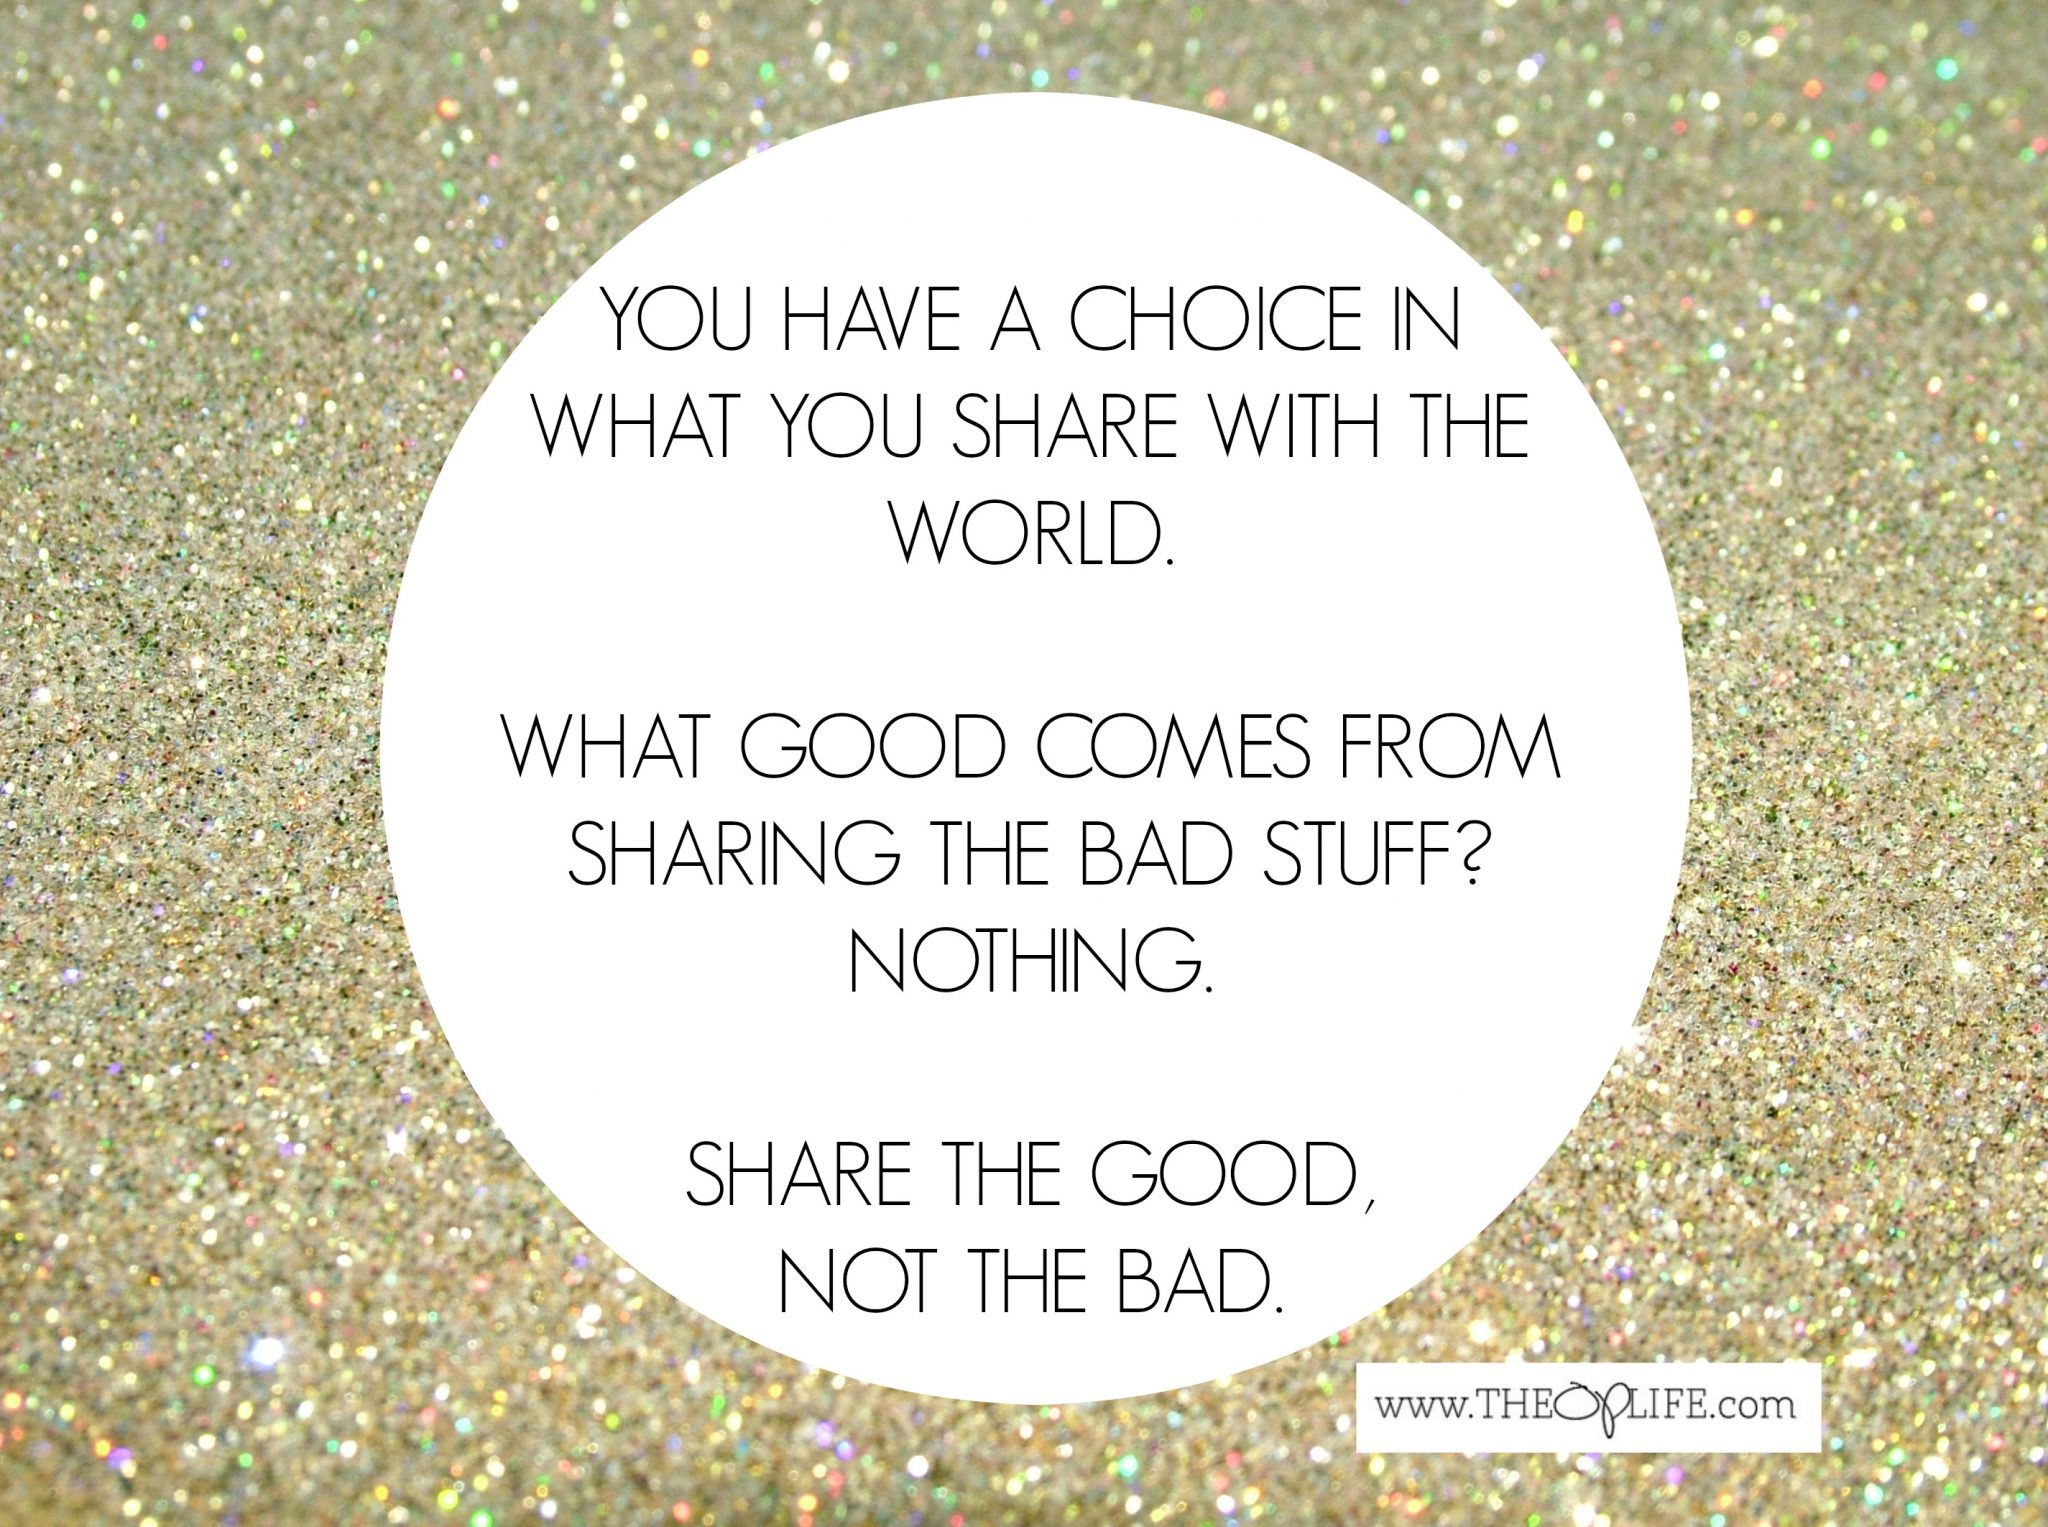 Share the good, not the bad.